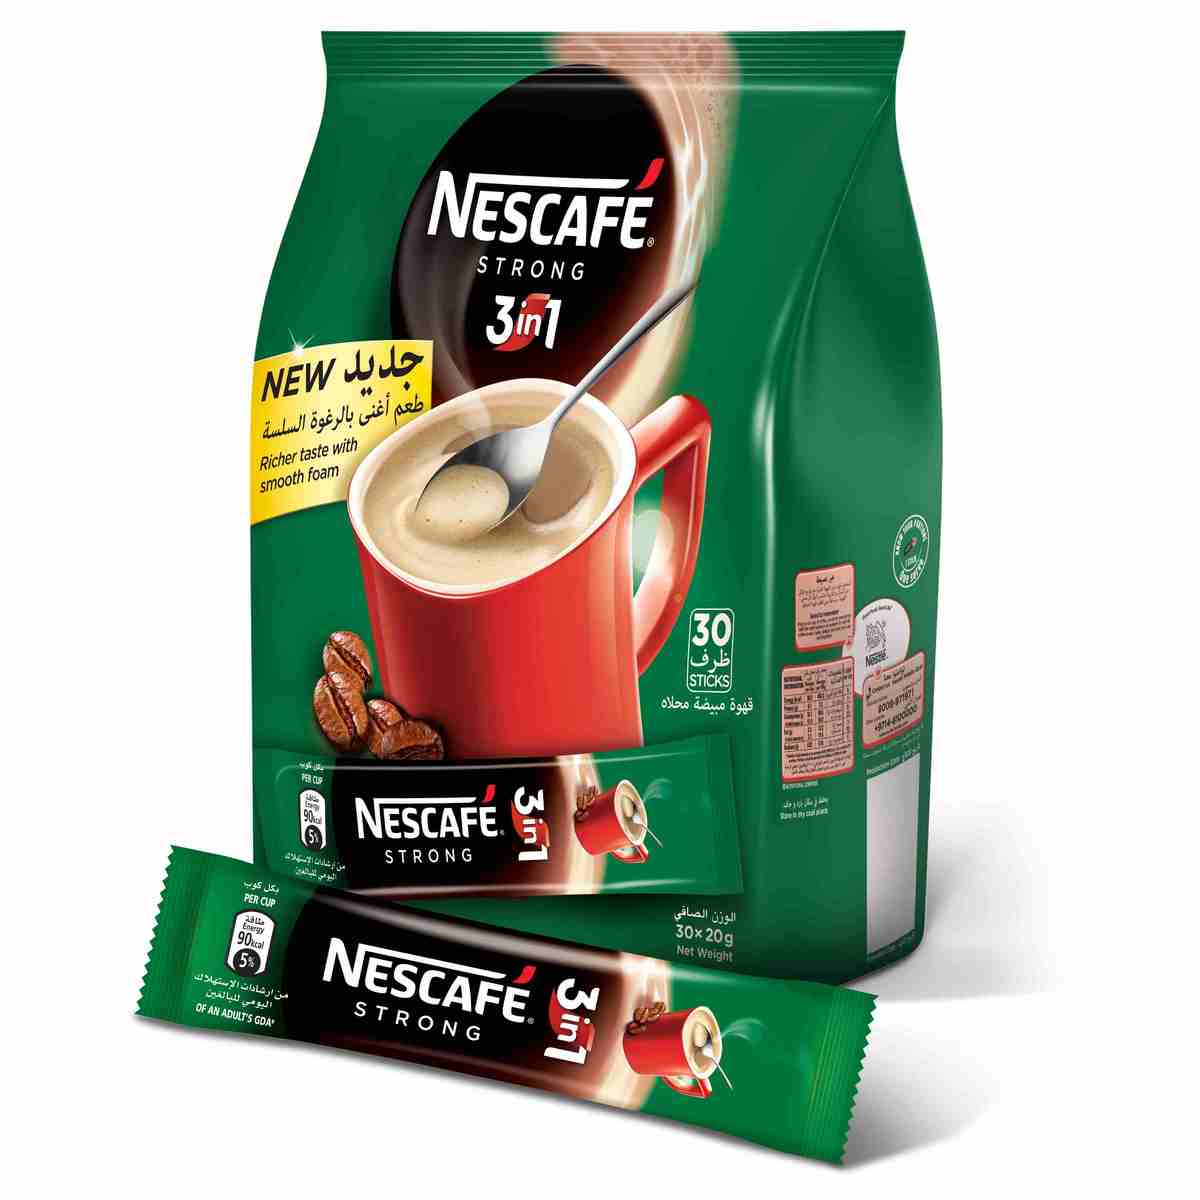 NESCAFE STRONG 3 IN 1